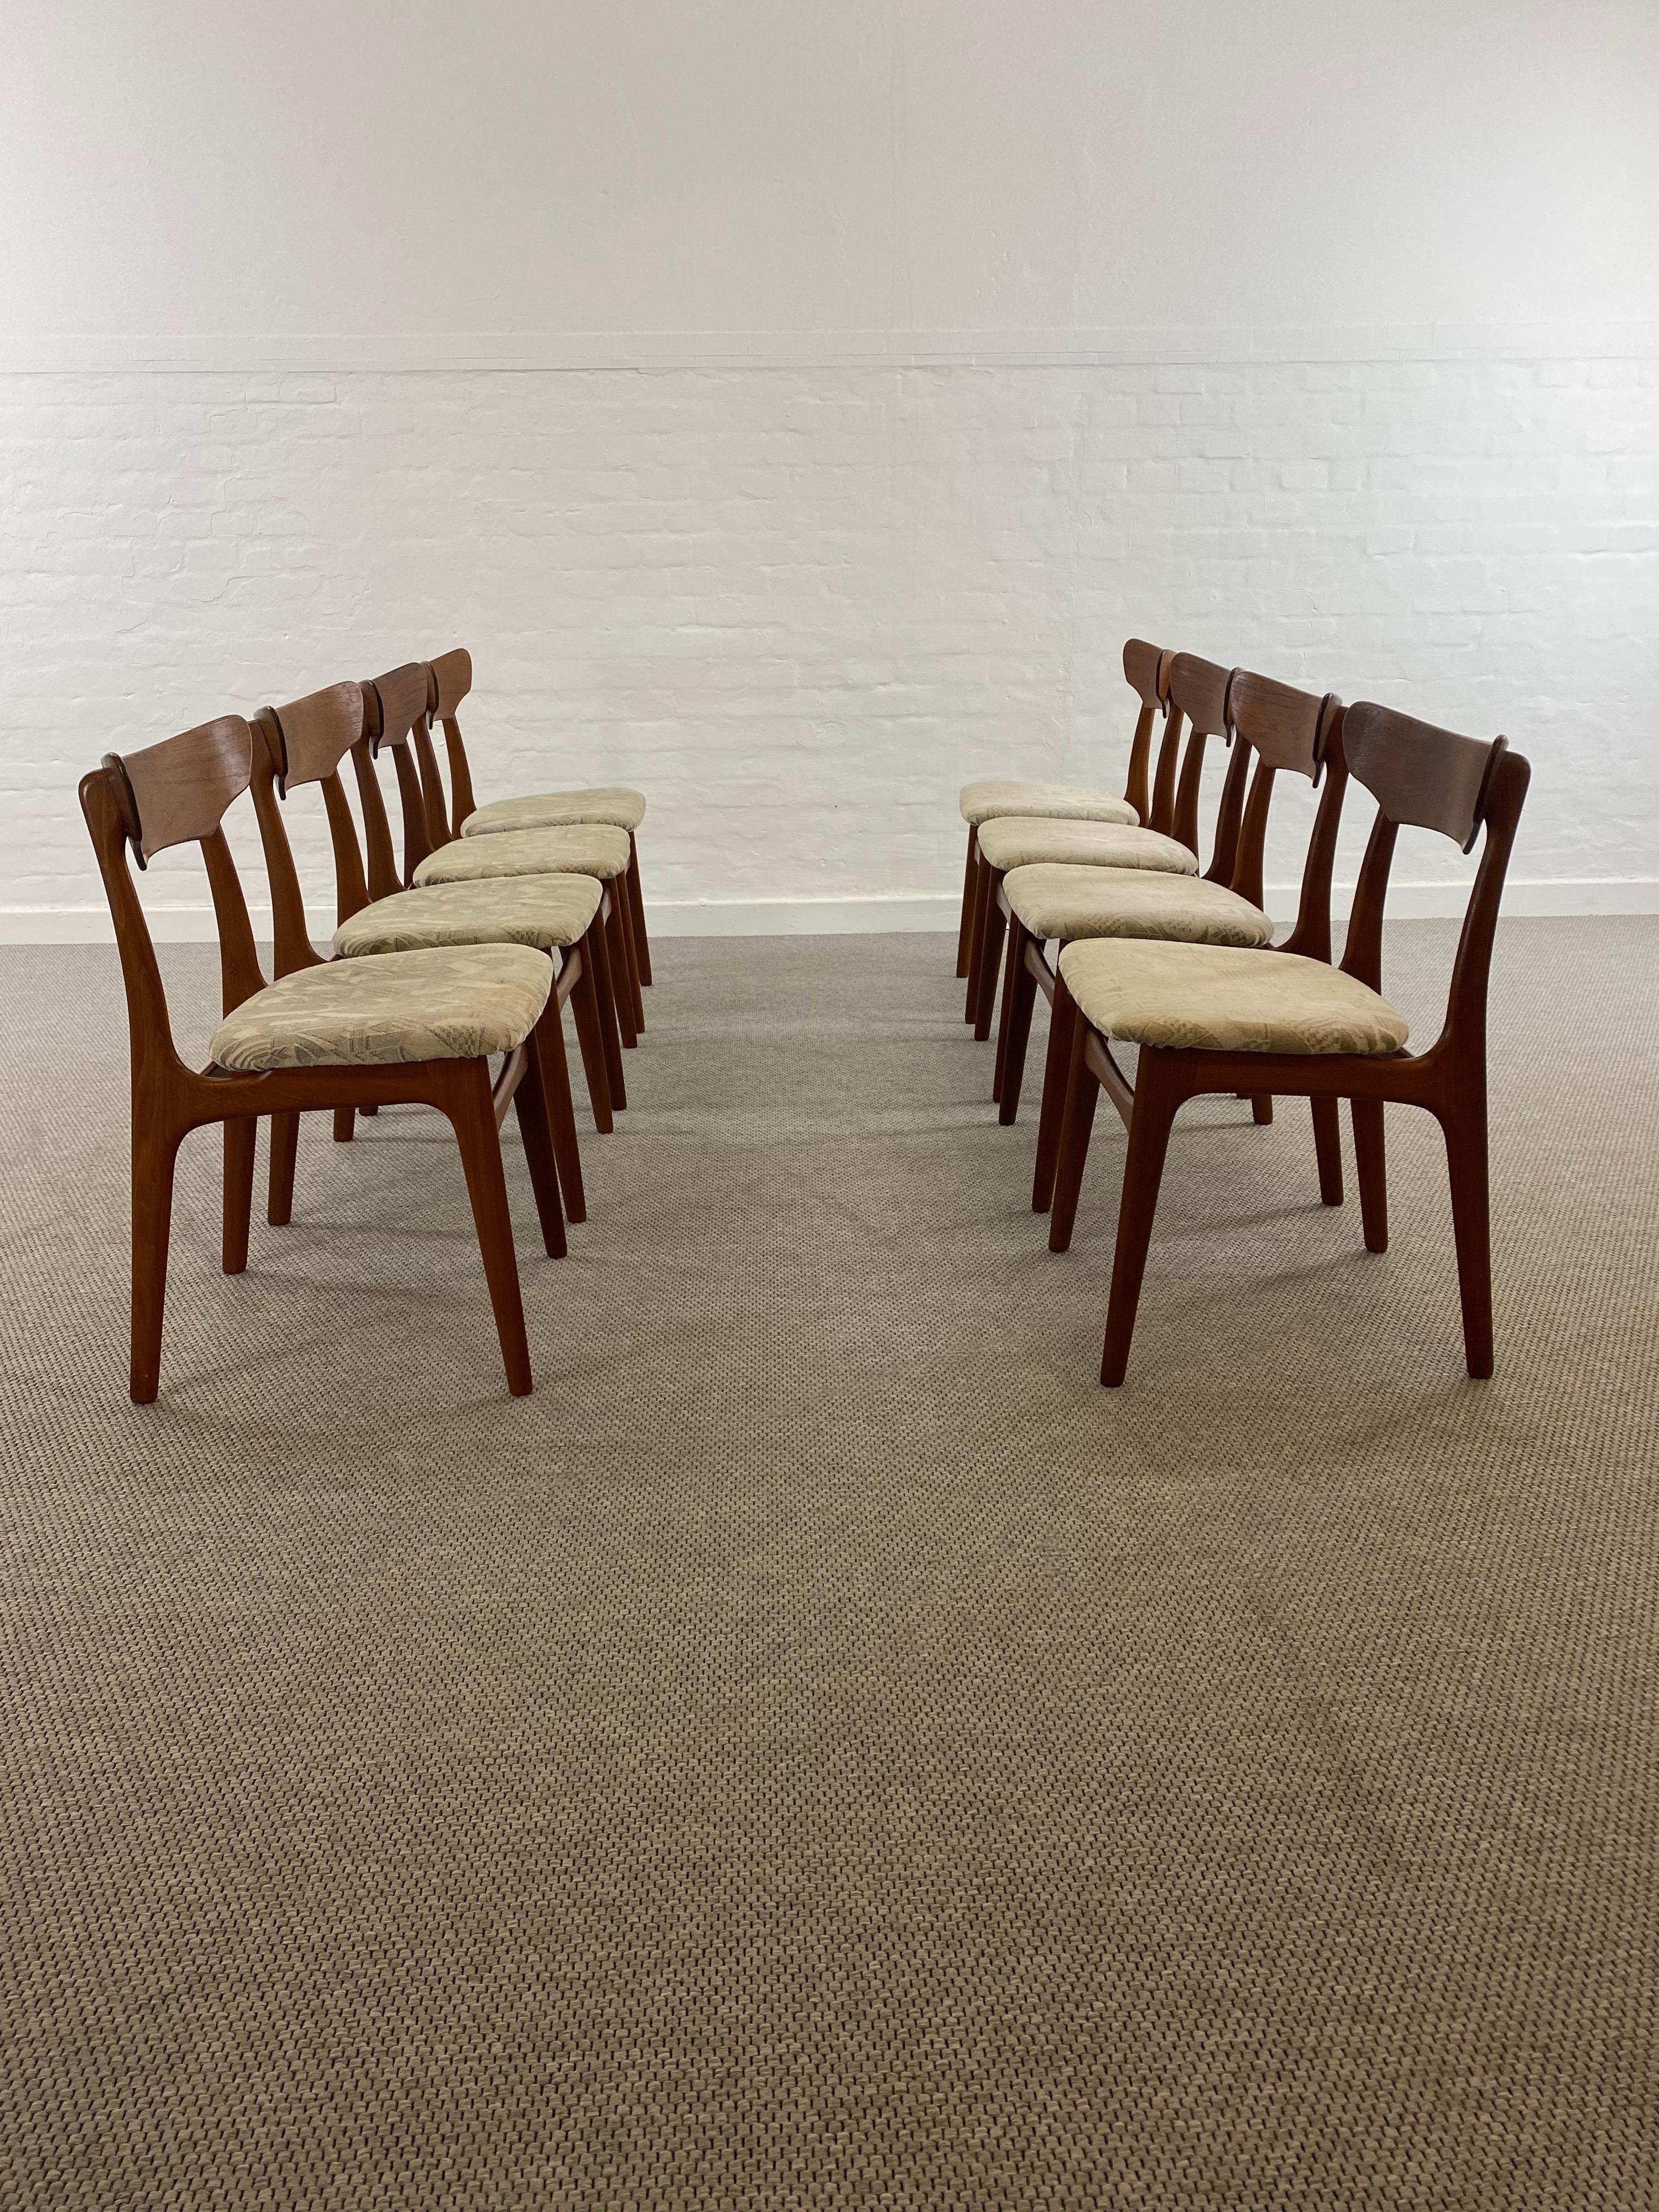 A beautiful and rare Set of 8 midcentury Teak Chairs from Schionning & Elgaard, manufactured by Randers Møbelfabrik, Denmark 1960s.
These chairs are made of solid teak wood and have an nice shape especially of the backrests.
The chairs seem to be